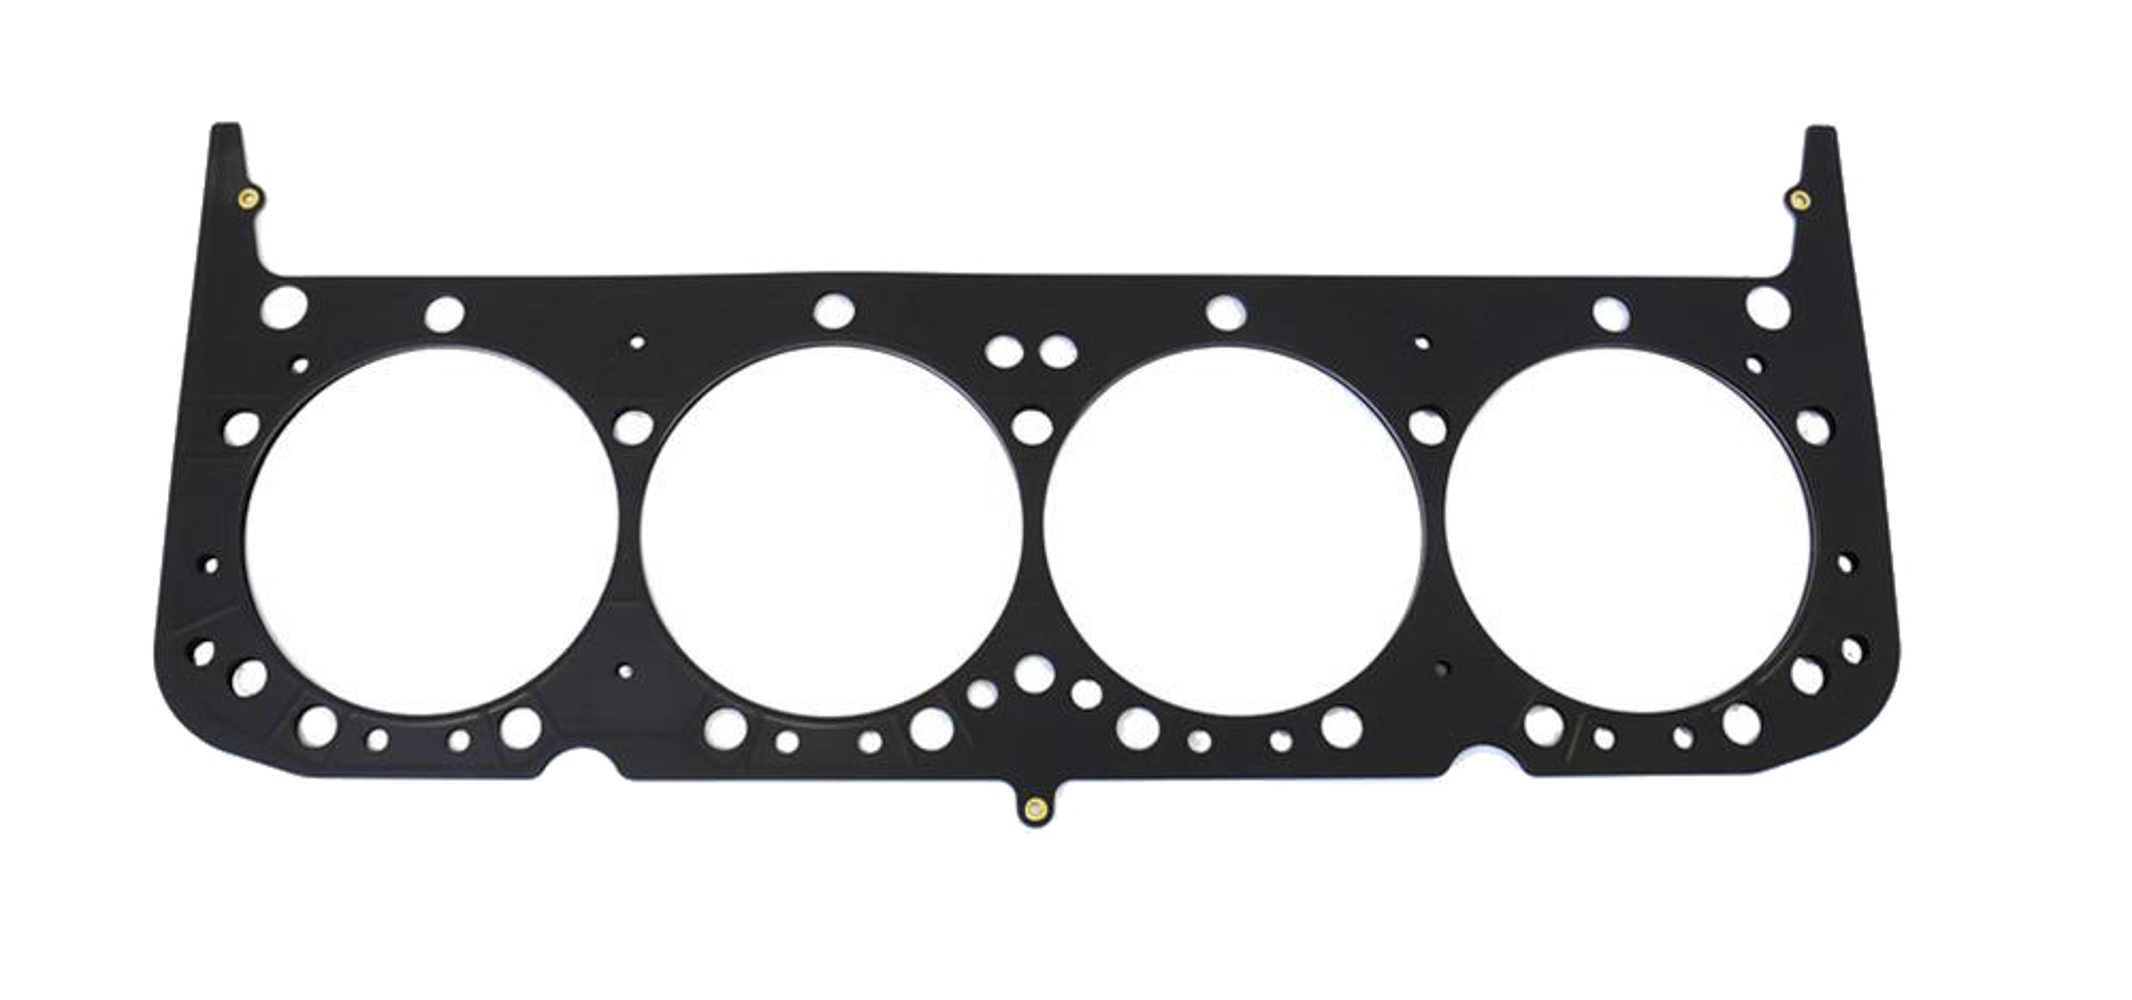 SCE Gaskets M111751GS - Cylinder Head Gasket, MLS Spartan, 4.174 in Bore, 0.051 in Compression Thickness, Multi-Layer Steel, Small Block Chevy, Each